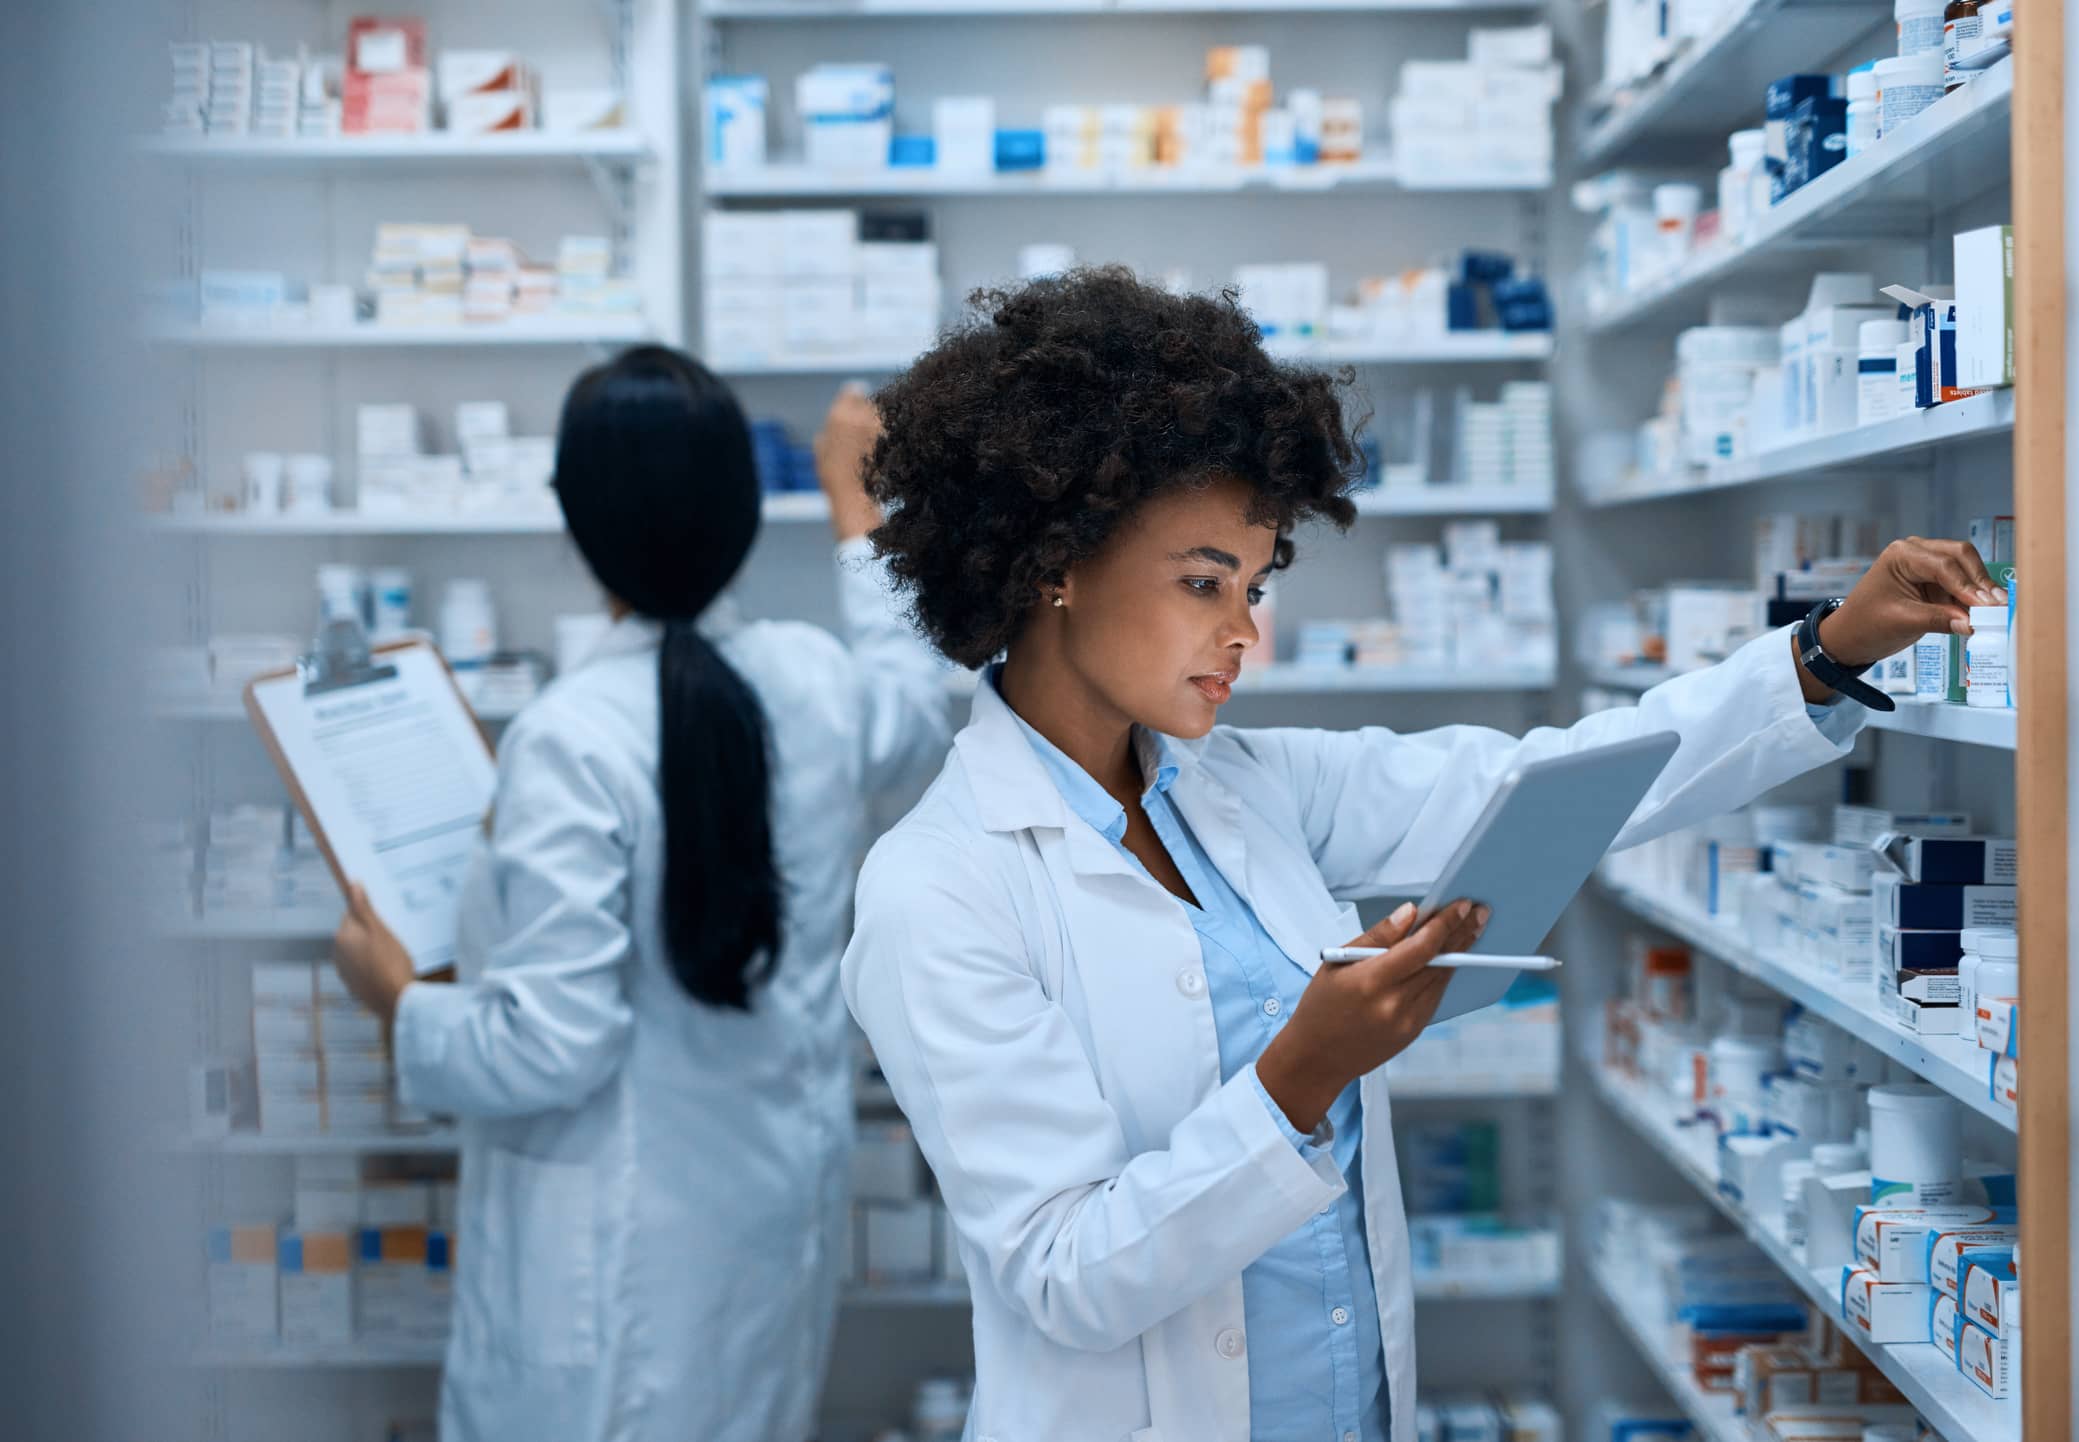 Two pharmacists selecting medications and subscriptions from shelves of pharmaceutical products